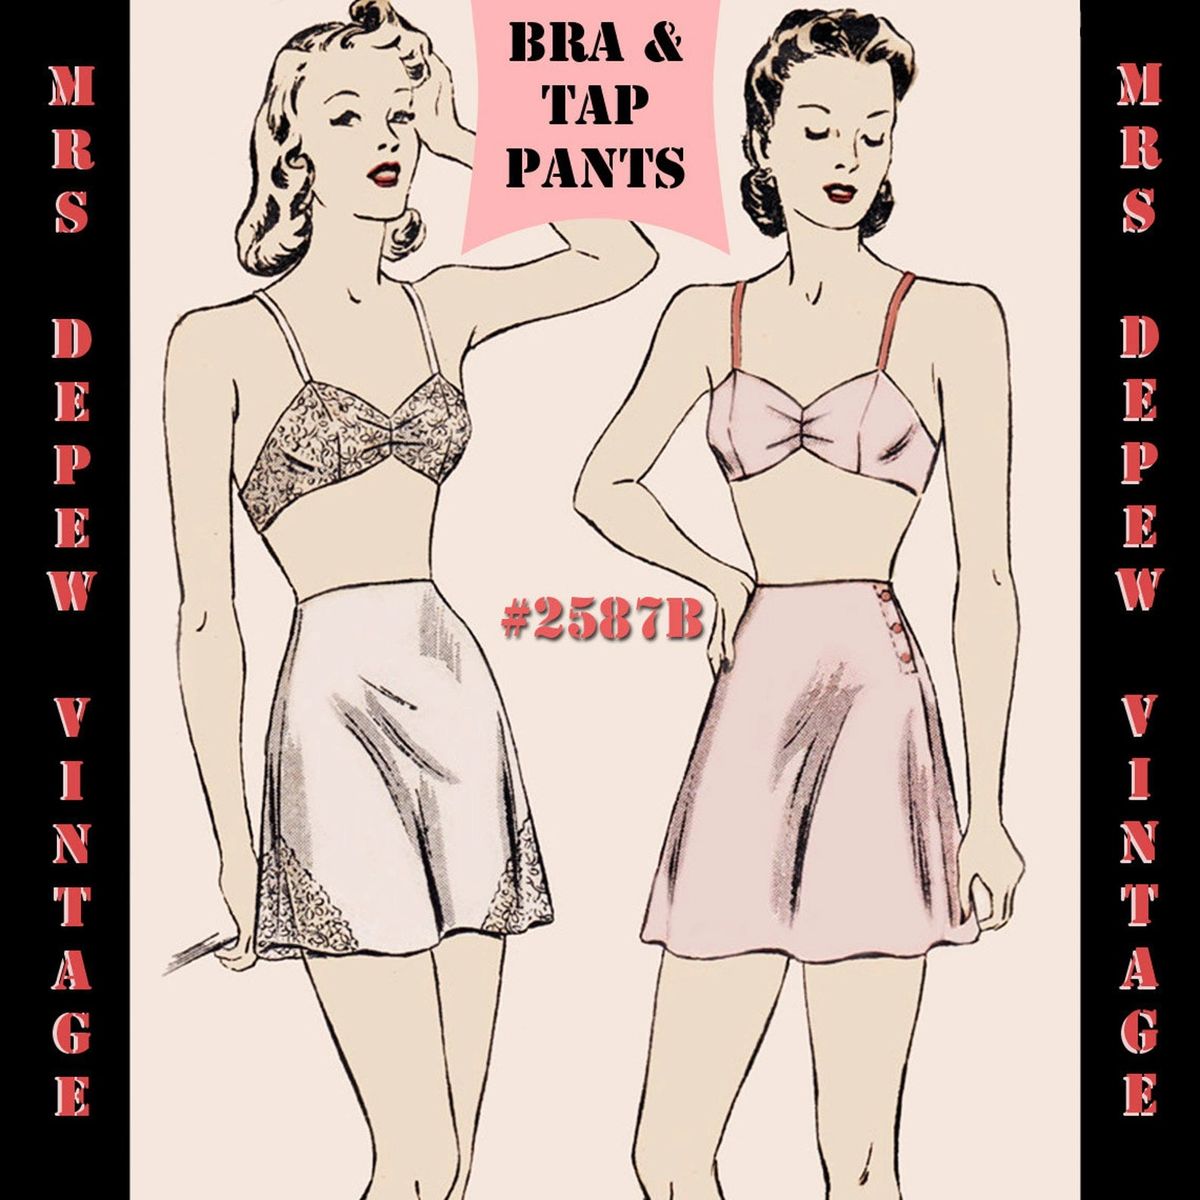 Vintage Sewing Pattern Lingerie Set MultiSize 1930s Bra and Tap Panties  32-50 Inch Bust #2023 - INSTANT DOWNLOAD